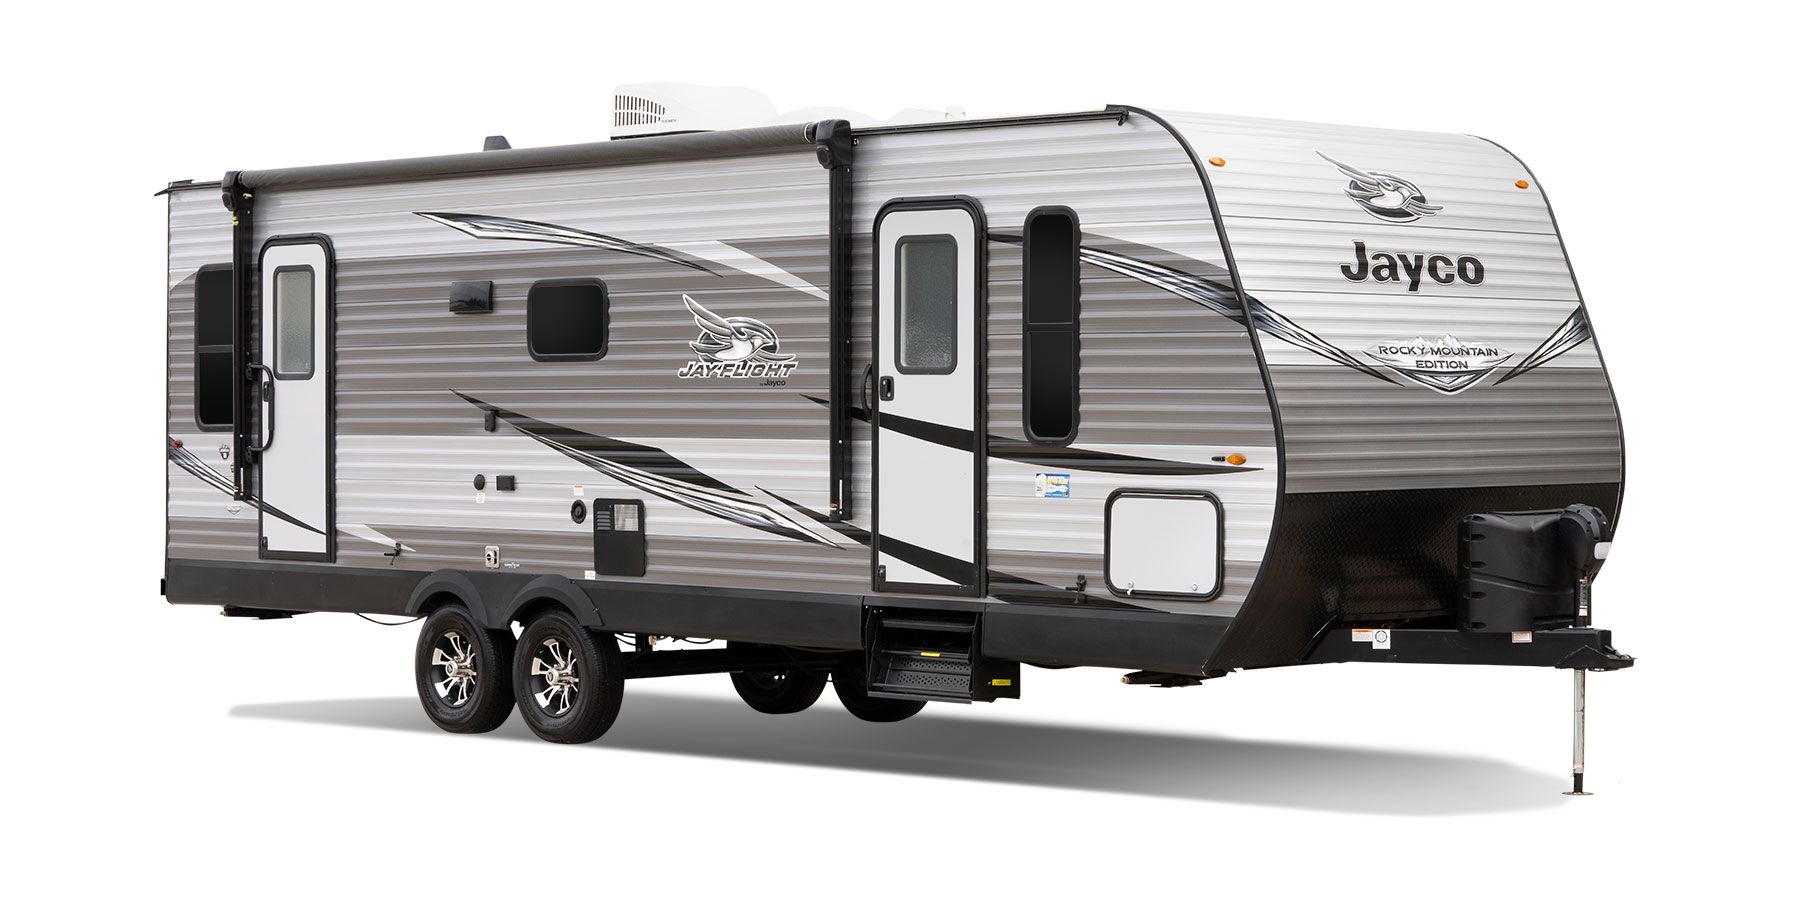 What is Jayco Rocky Mountain Edition 